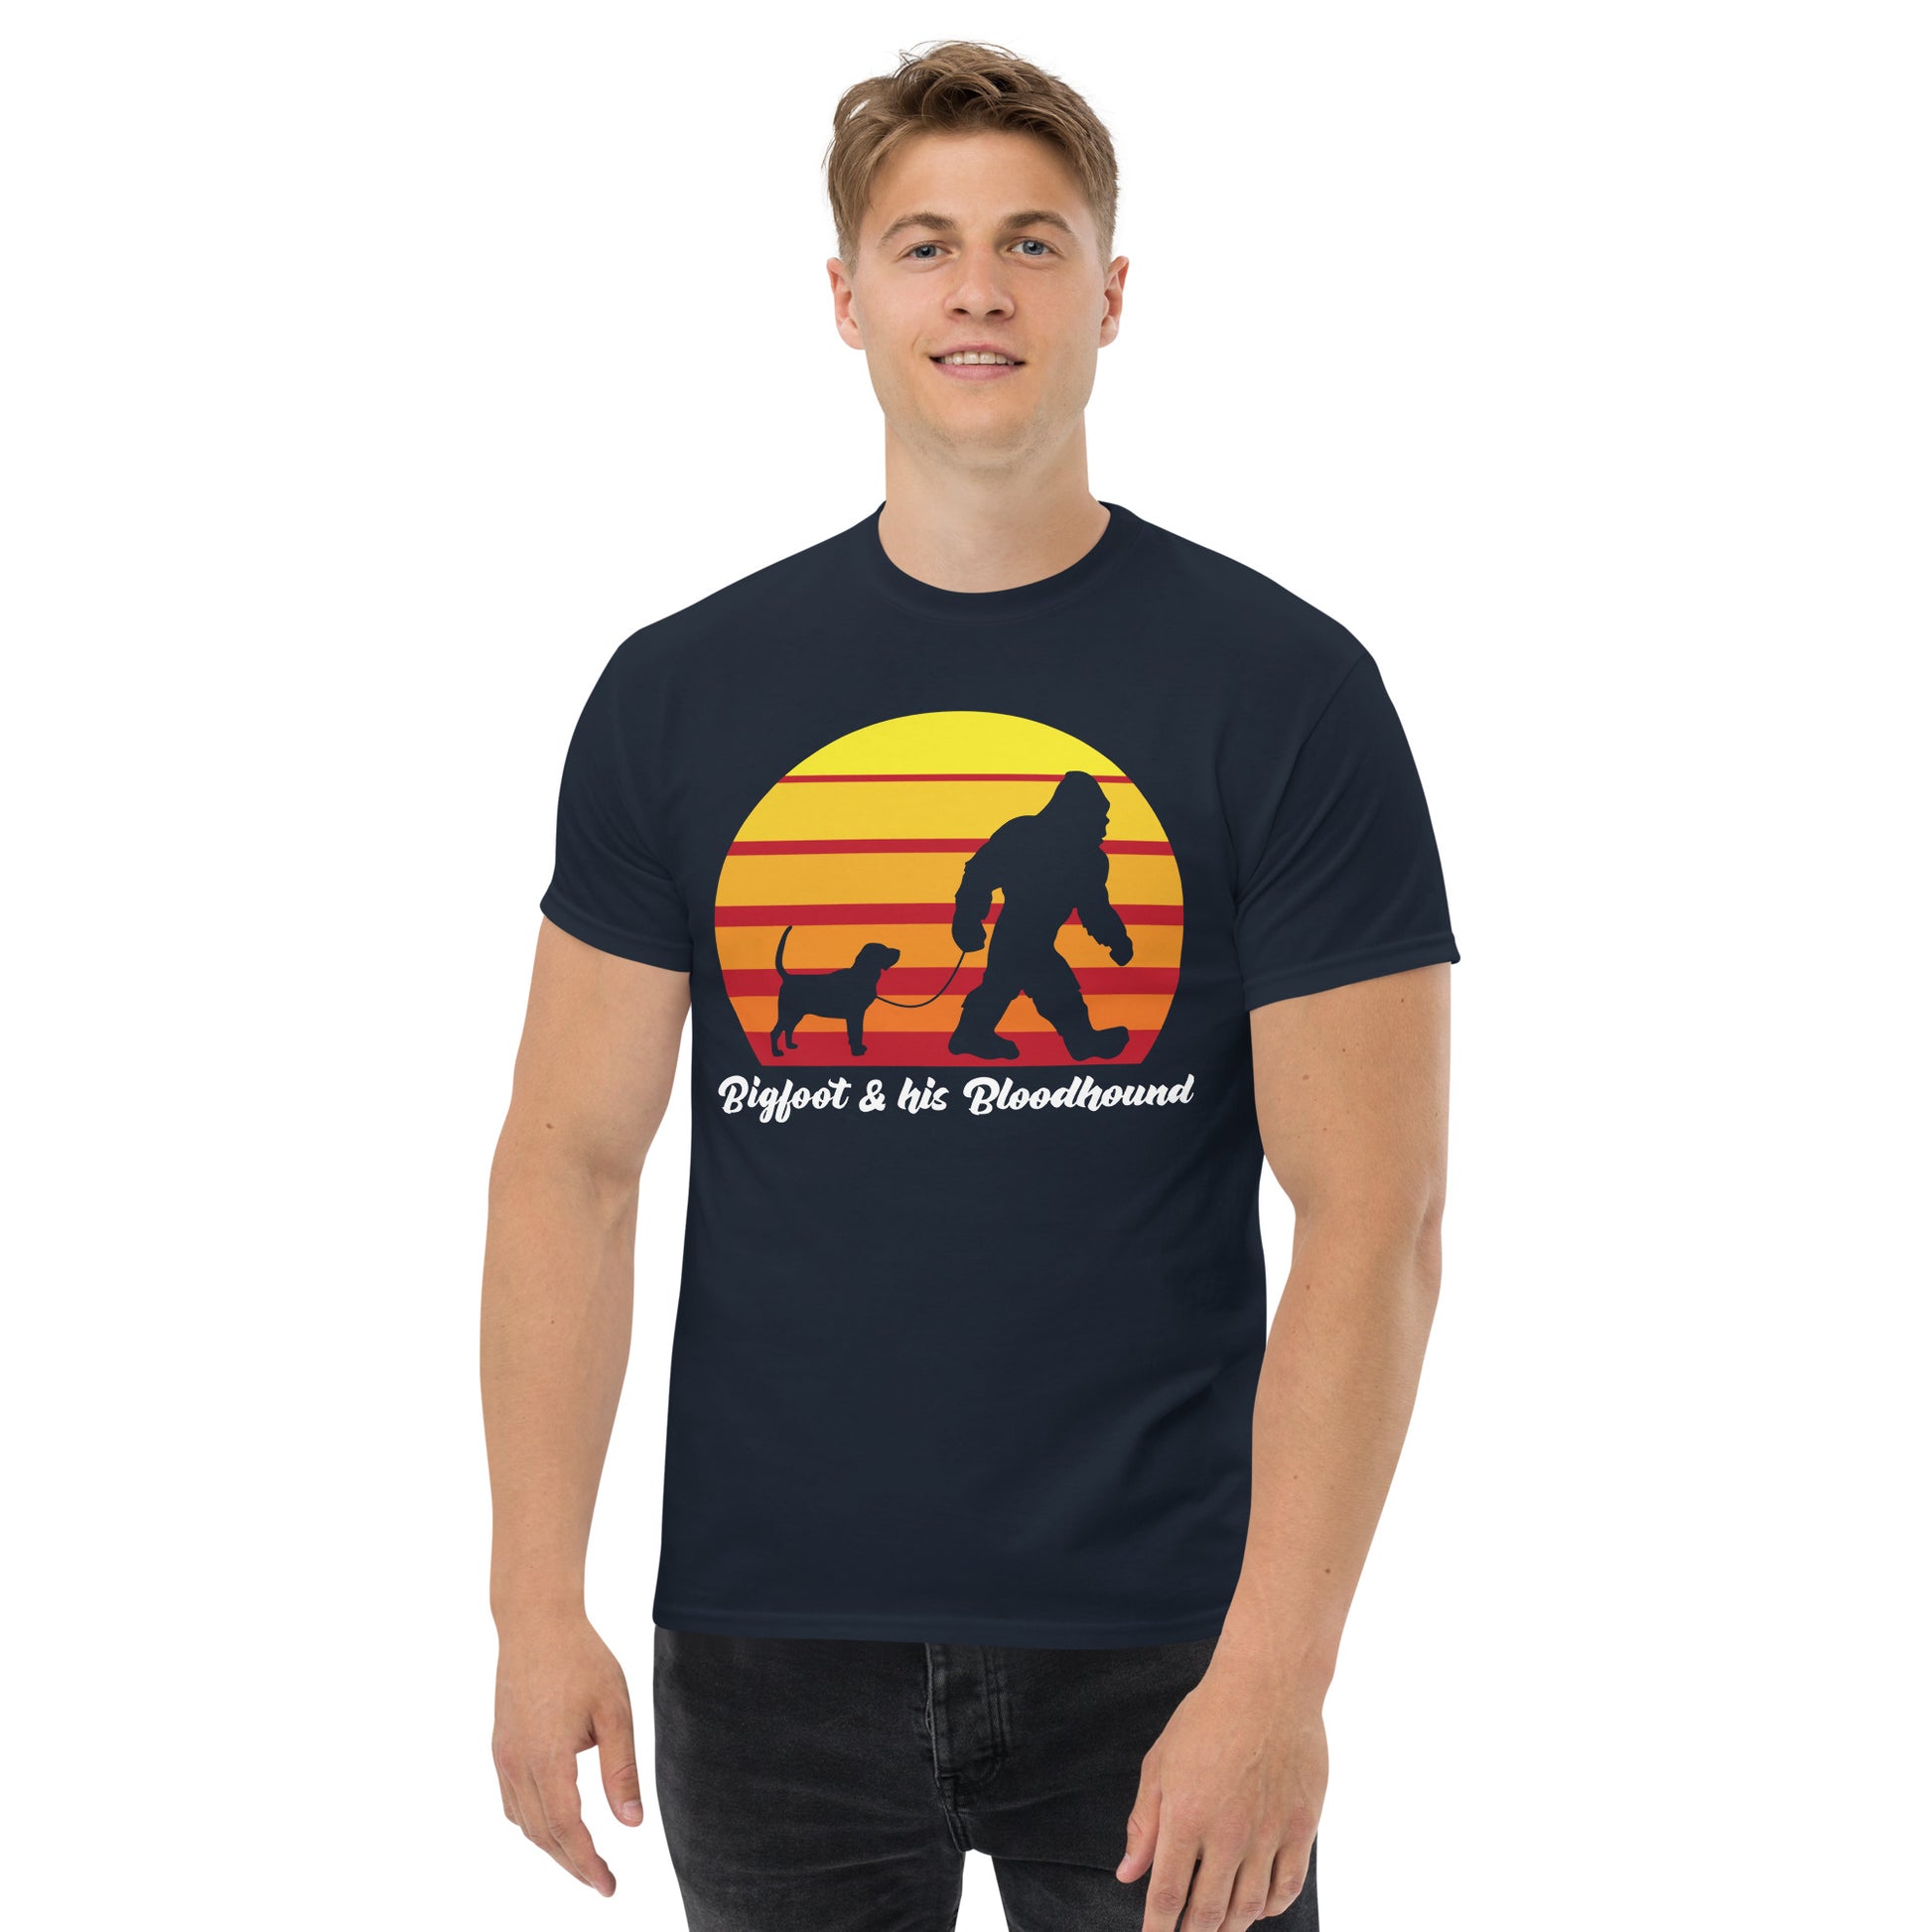 Big foot and his Bloodhound men’s navy t-shirt by Dog Artistry.